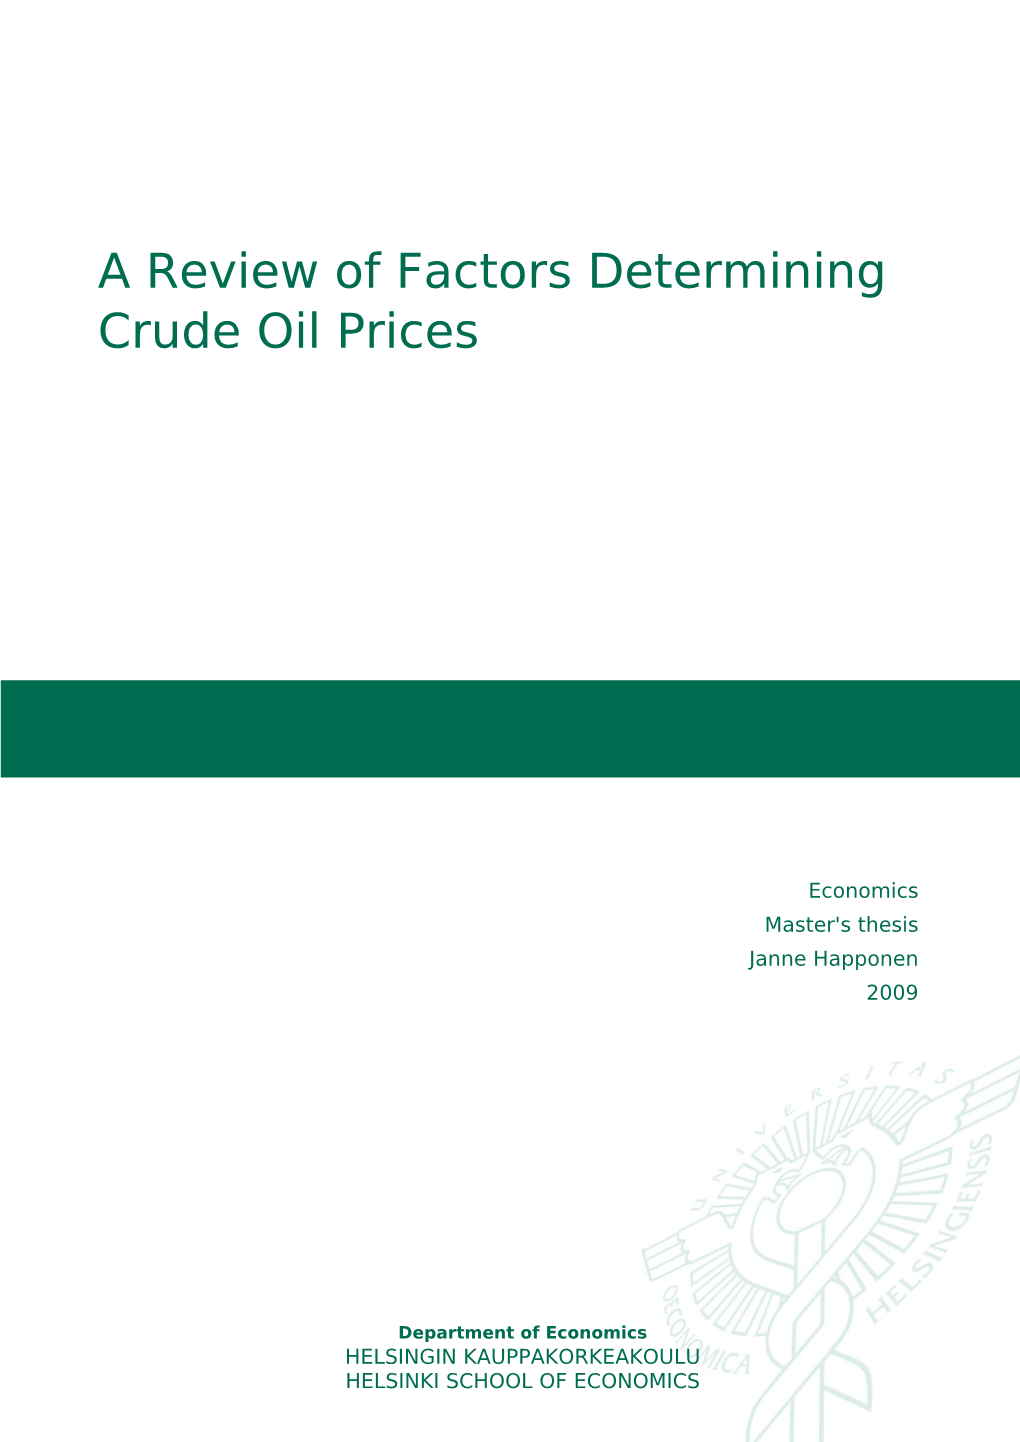 A Review of Factors Determining Crude Oil Prices